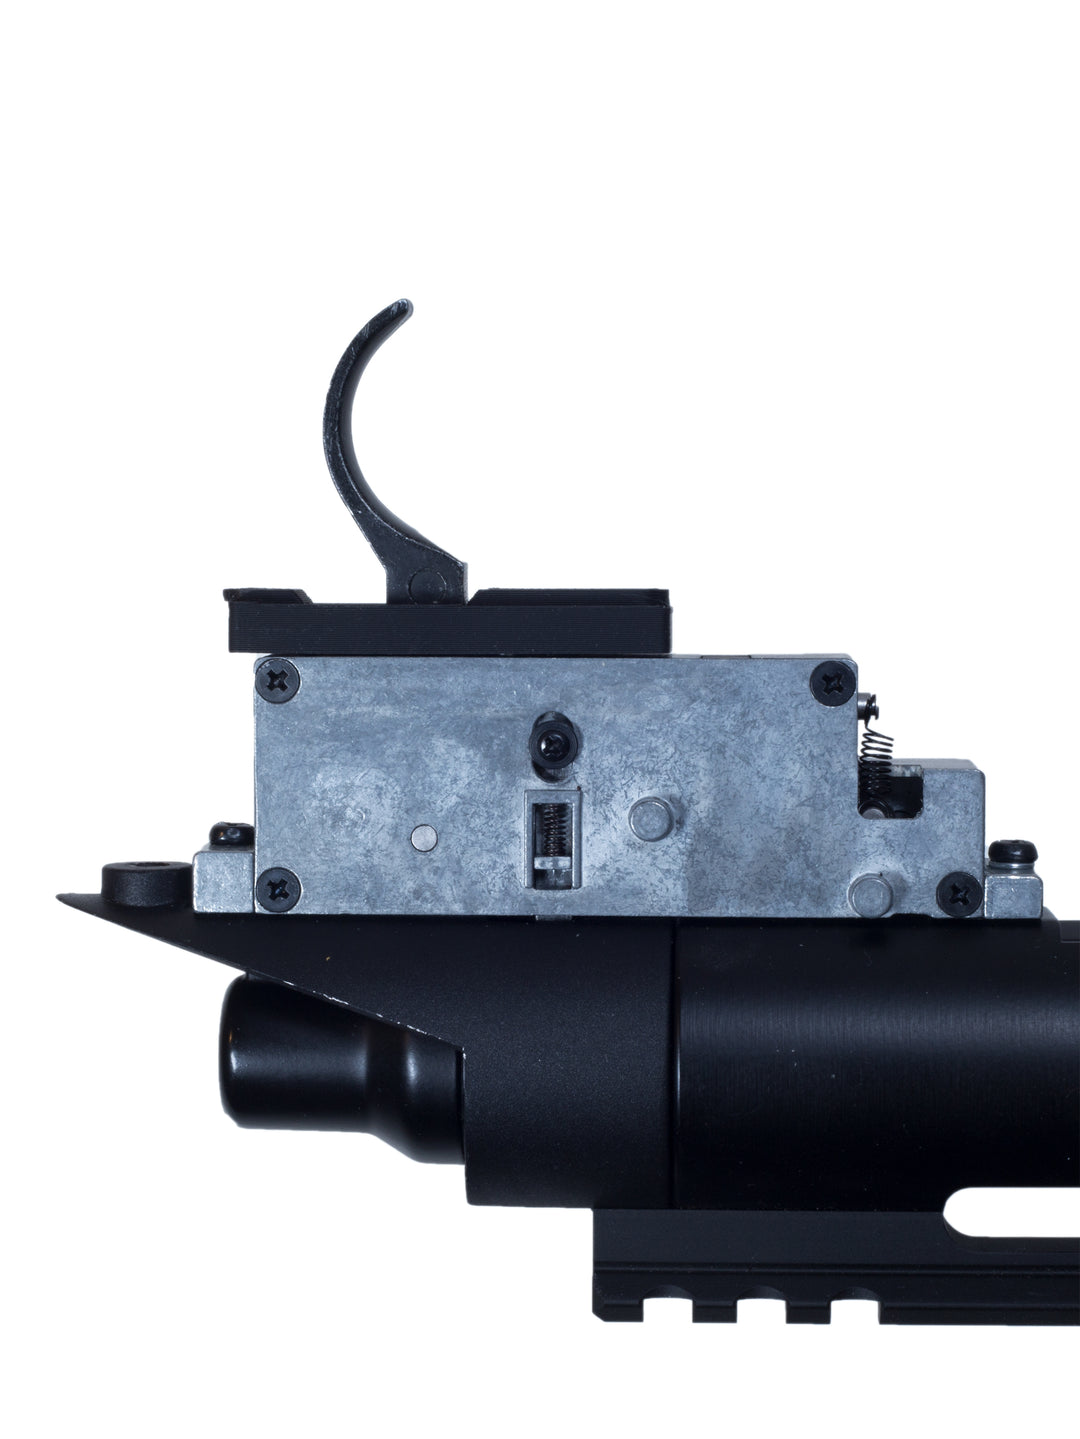 SSG24 Trigger Dust Cover